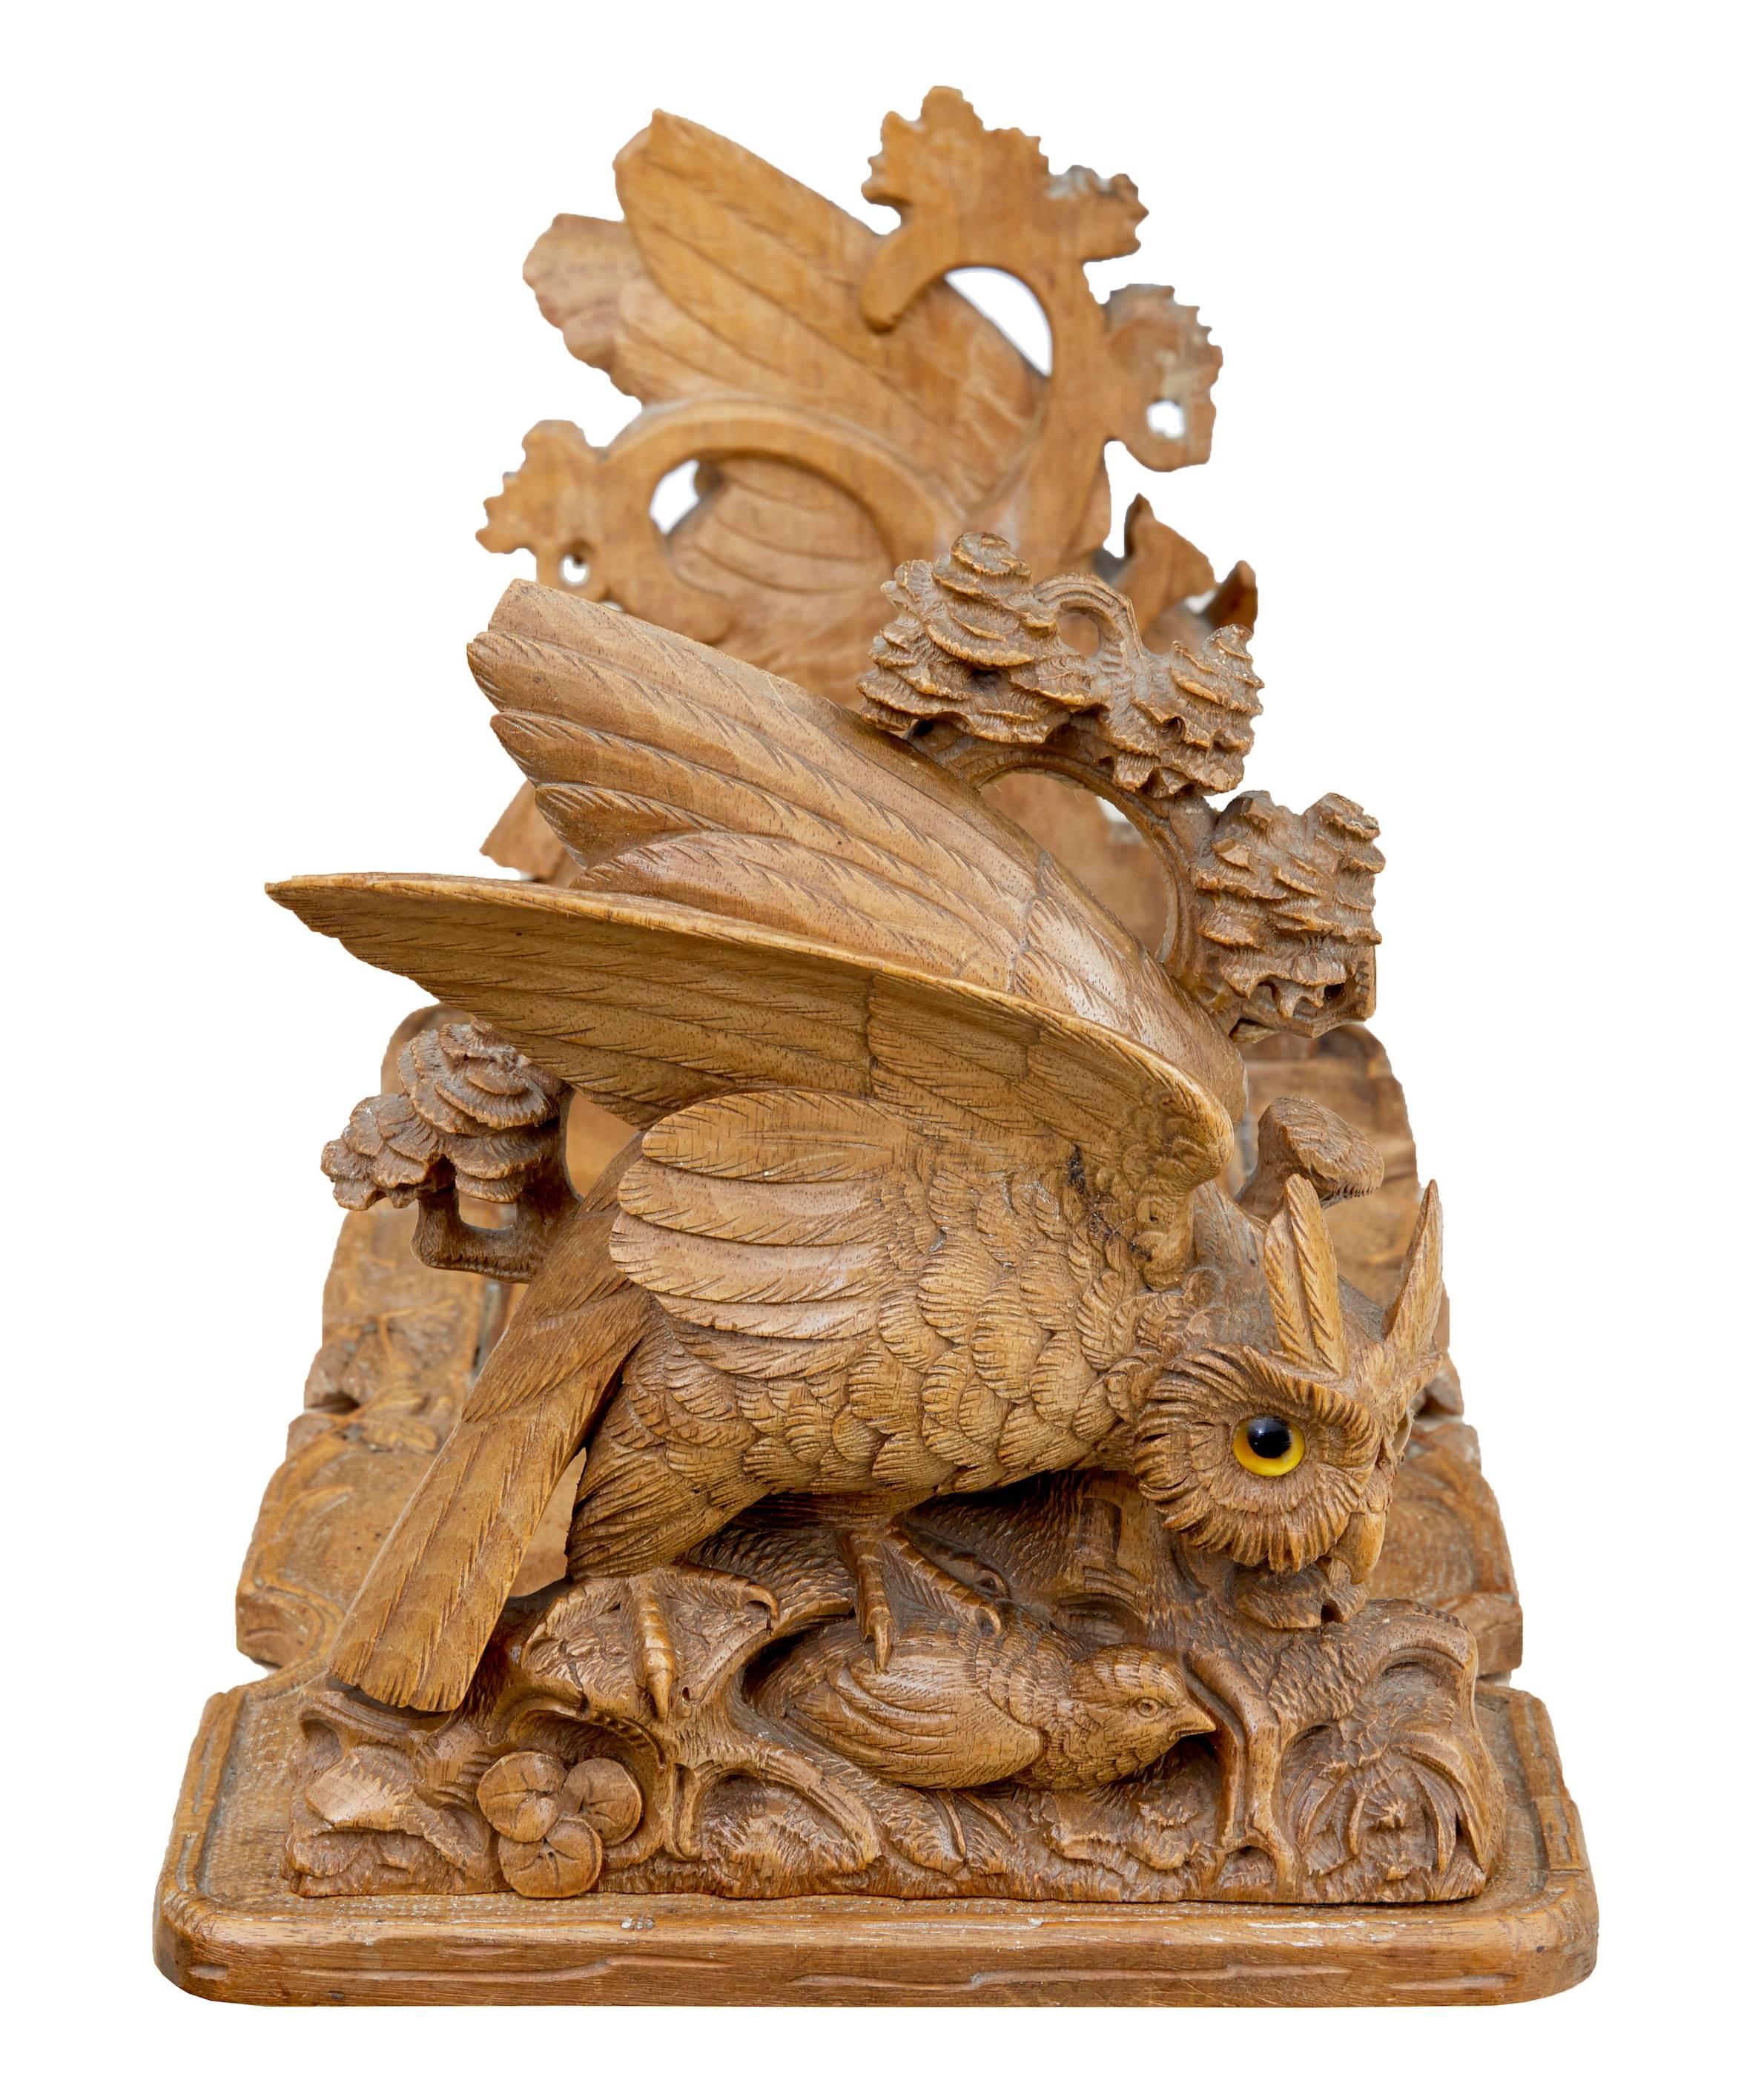 Fine quality carved oak book ends, circa 1890.
Carved with owls standing over its prey. Quality depth of carving in the solid.
Some losses to surface where books are sat and is now in a fixed position, rather than extendable when first